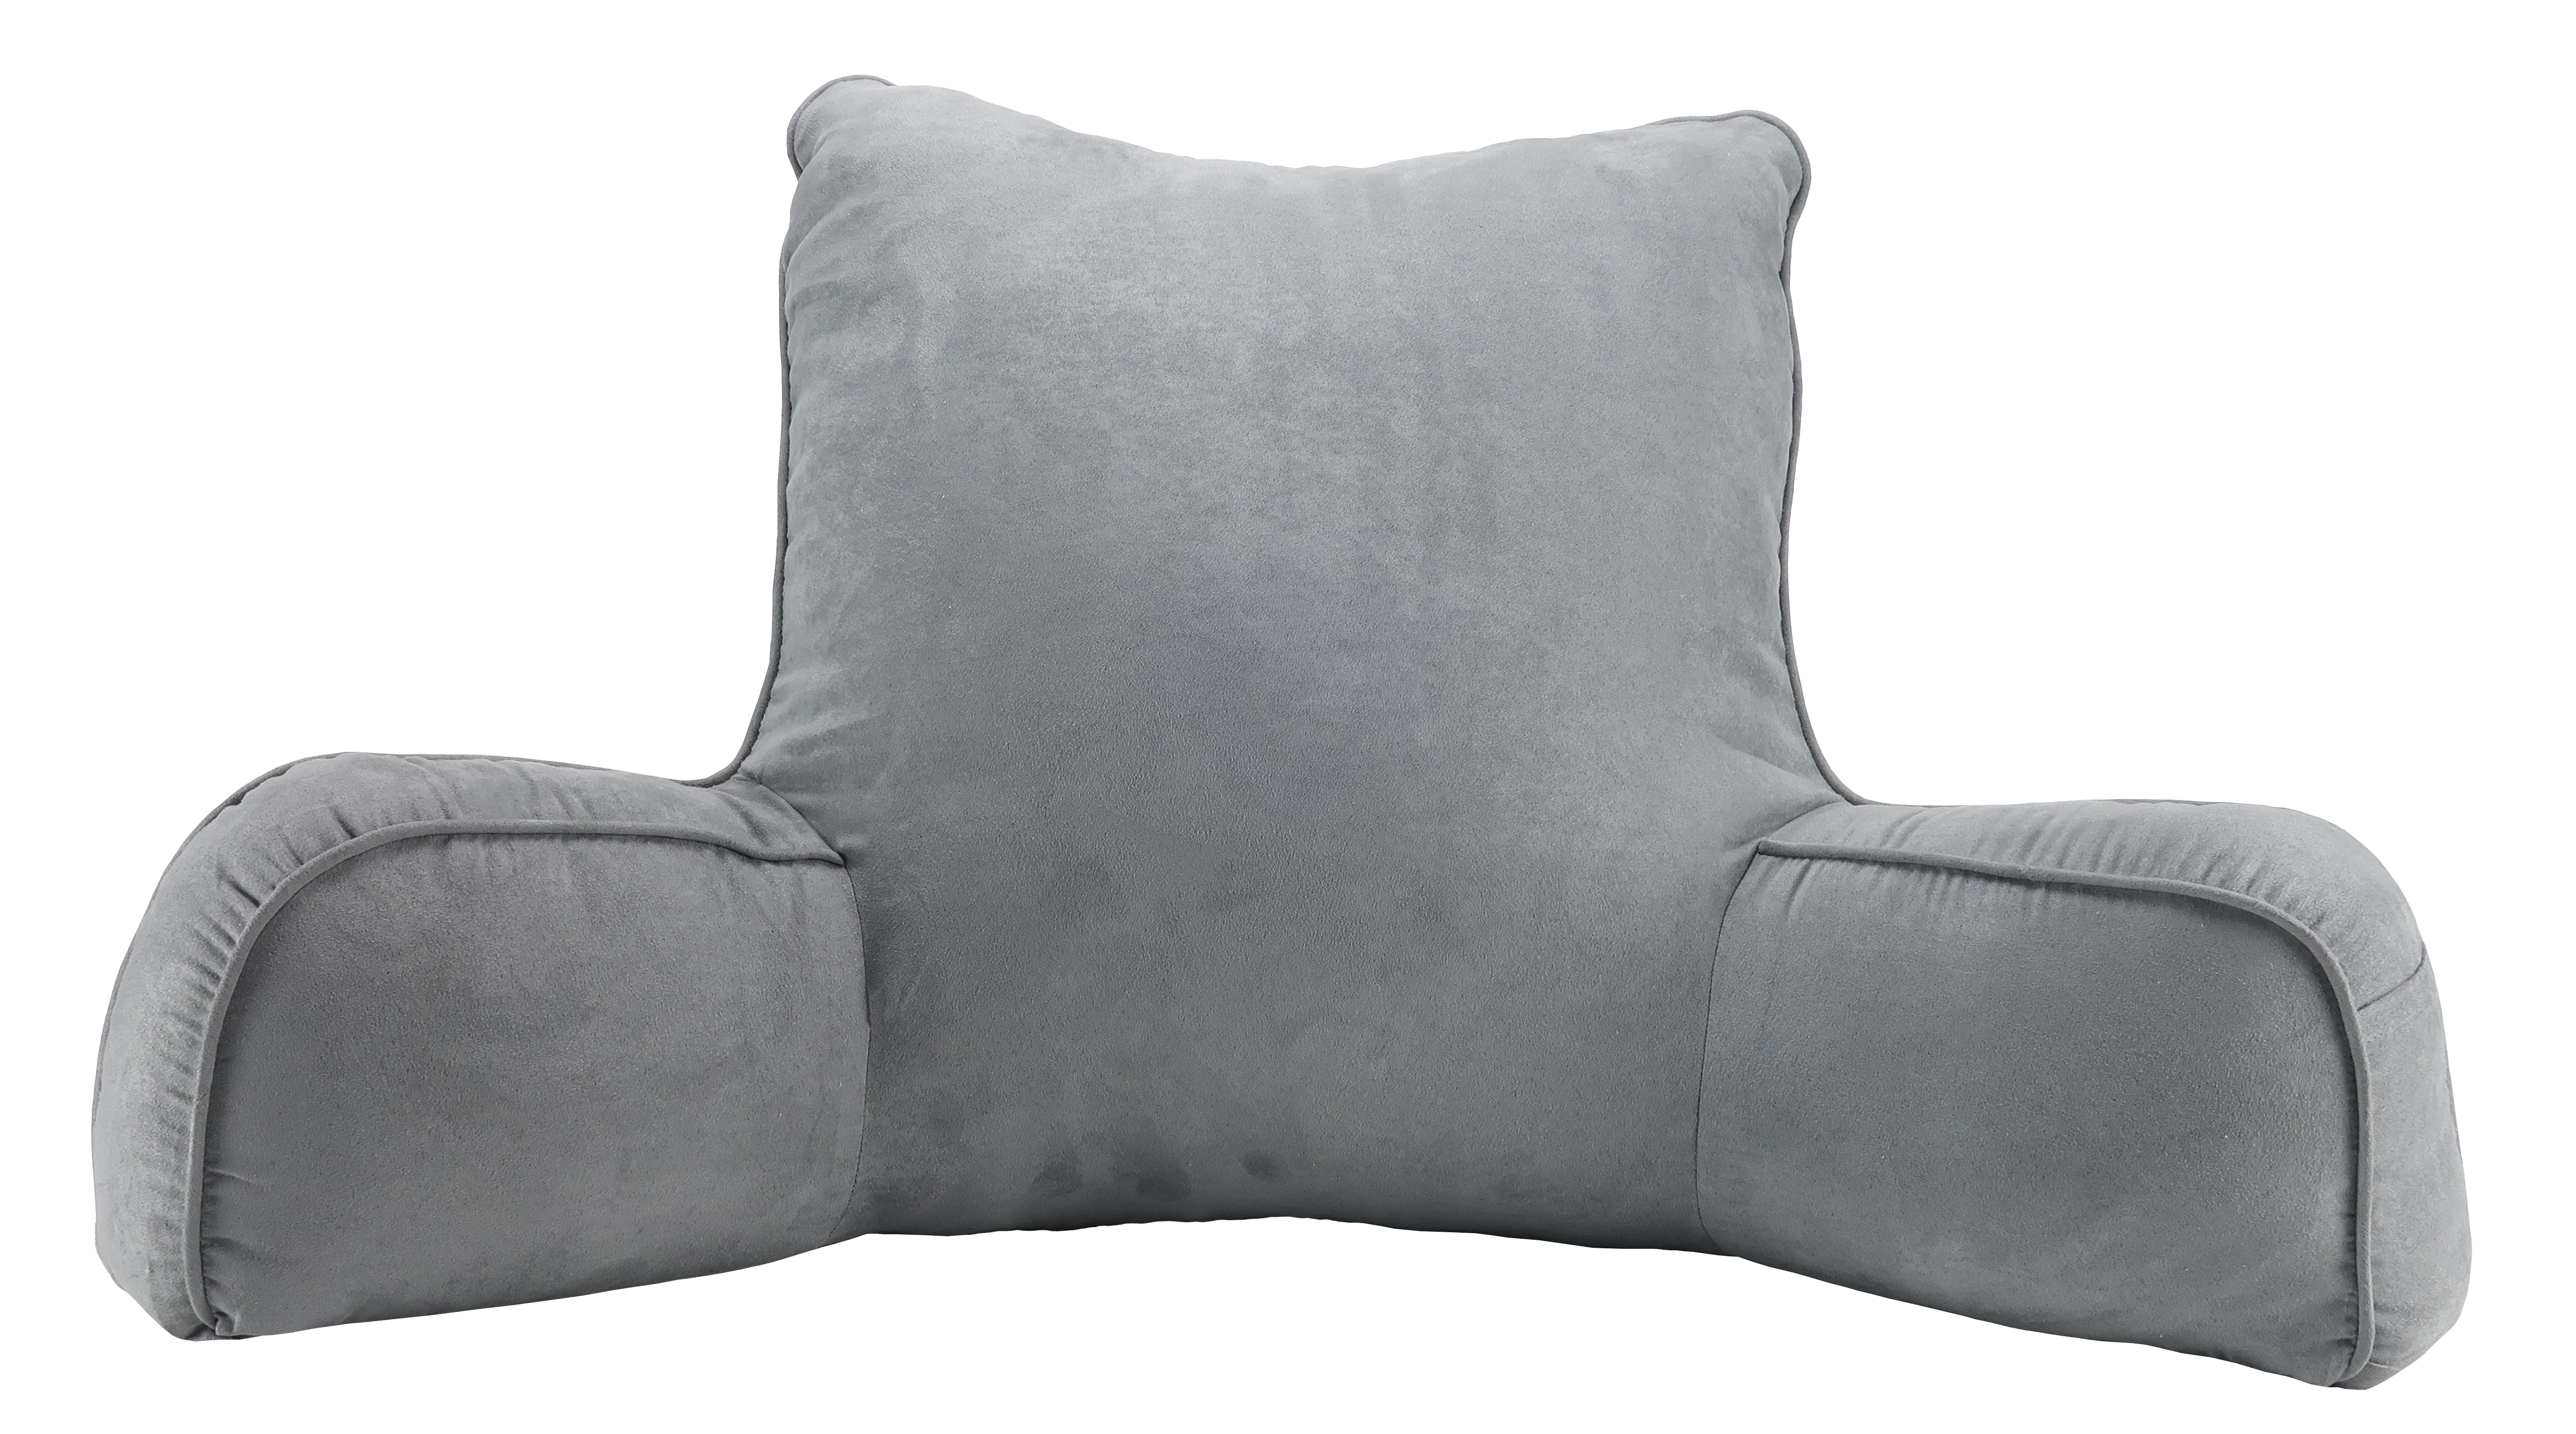 Elements Gray Solid Print Polyester Bed Rest Pillow - image 2 of 5